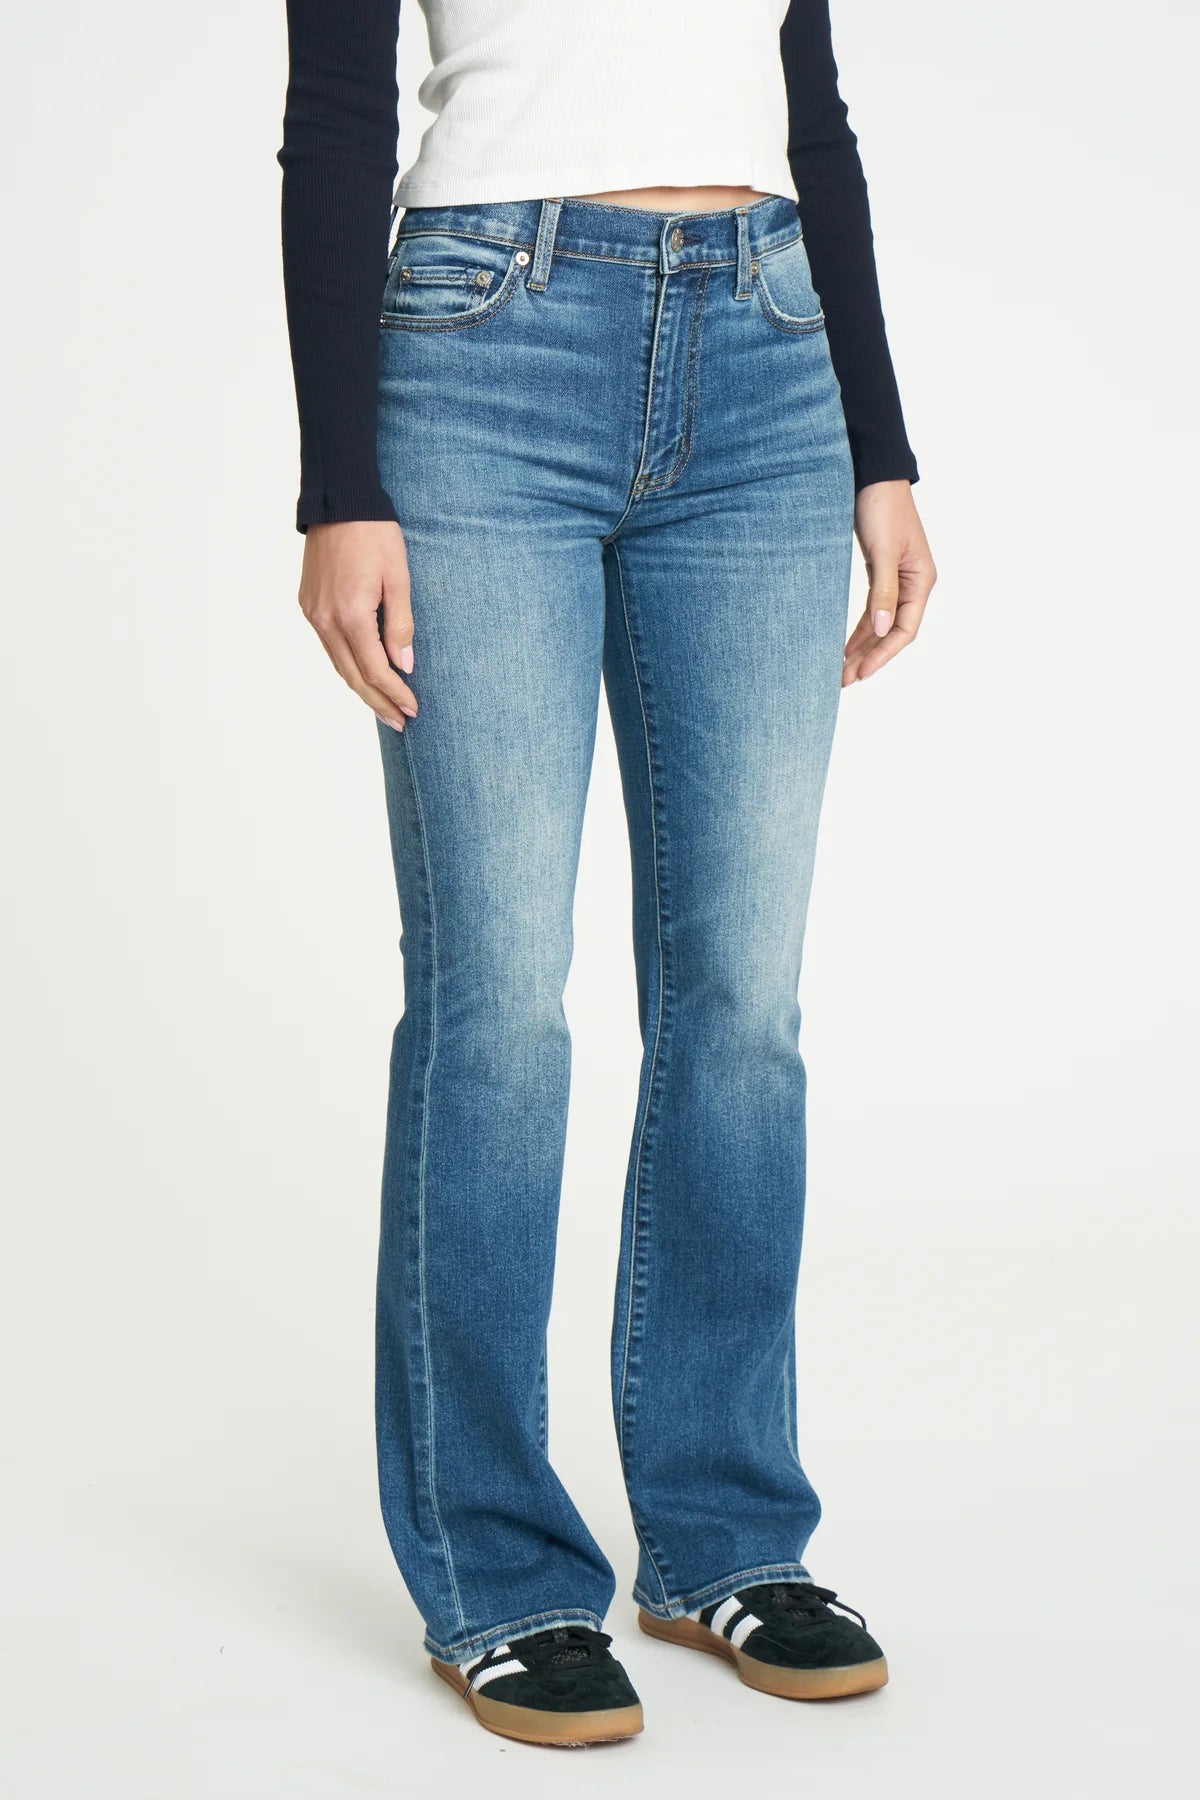 Covergirl Mid Rise Bootcut in Perfection